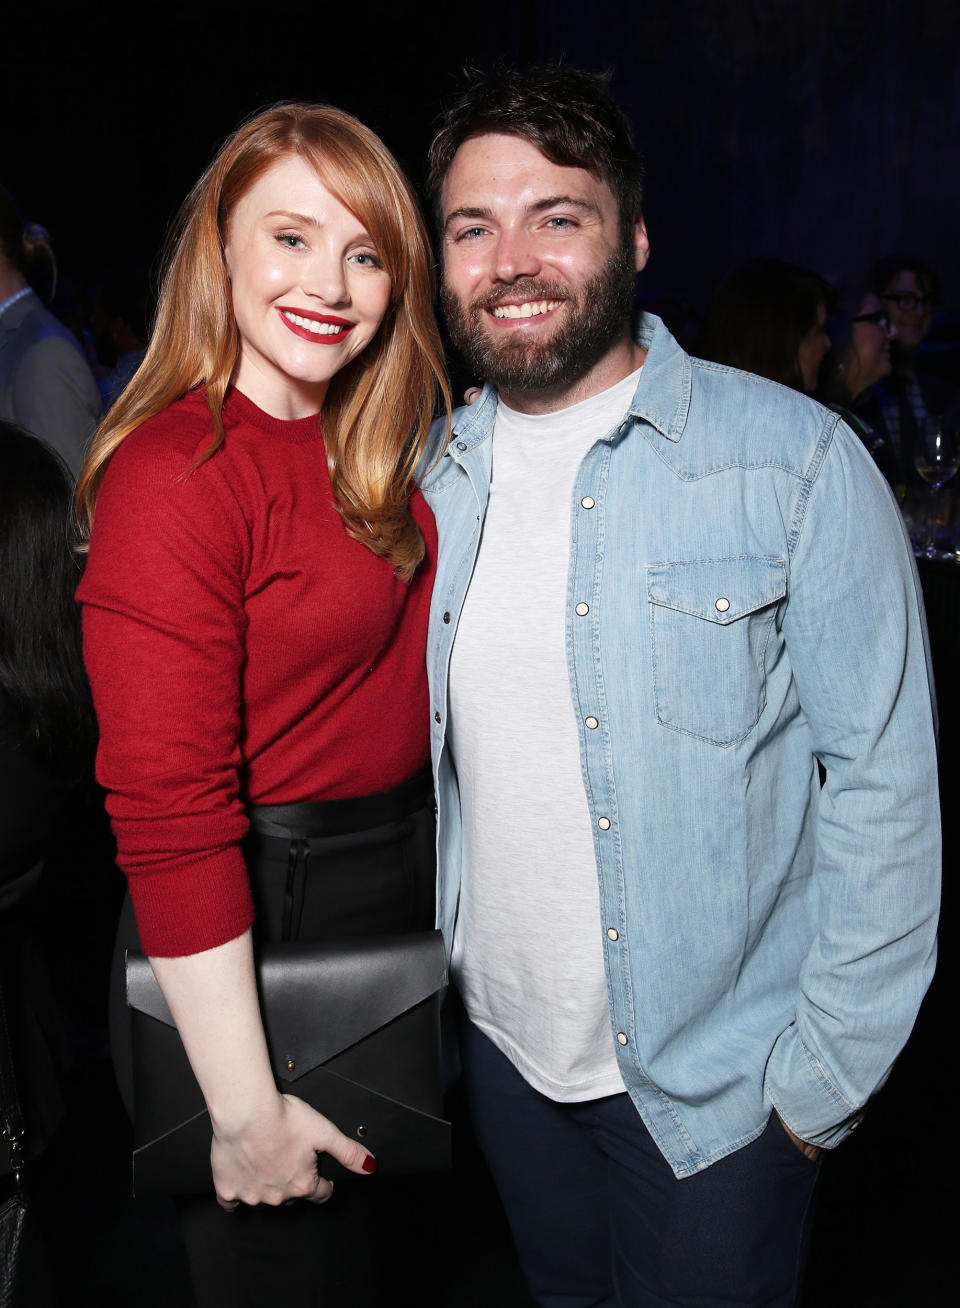  Bryce Dallas Howard and husband Seth Gabel attend Sundance Institute NIGHT BEFORE NEXT at The Theatre At The Ace Hotel on August 11, 2016 in Los Angeles, California. (Todd Williamson / Getty Images)